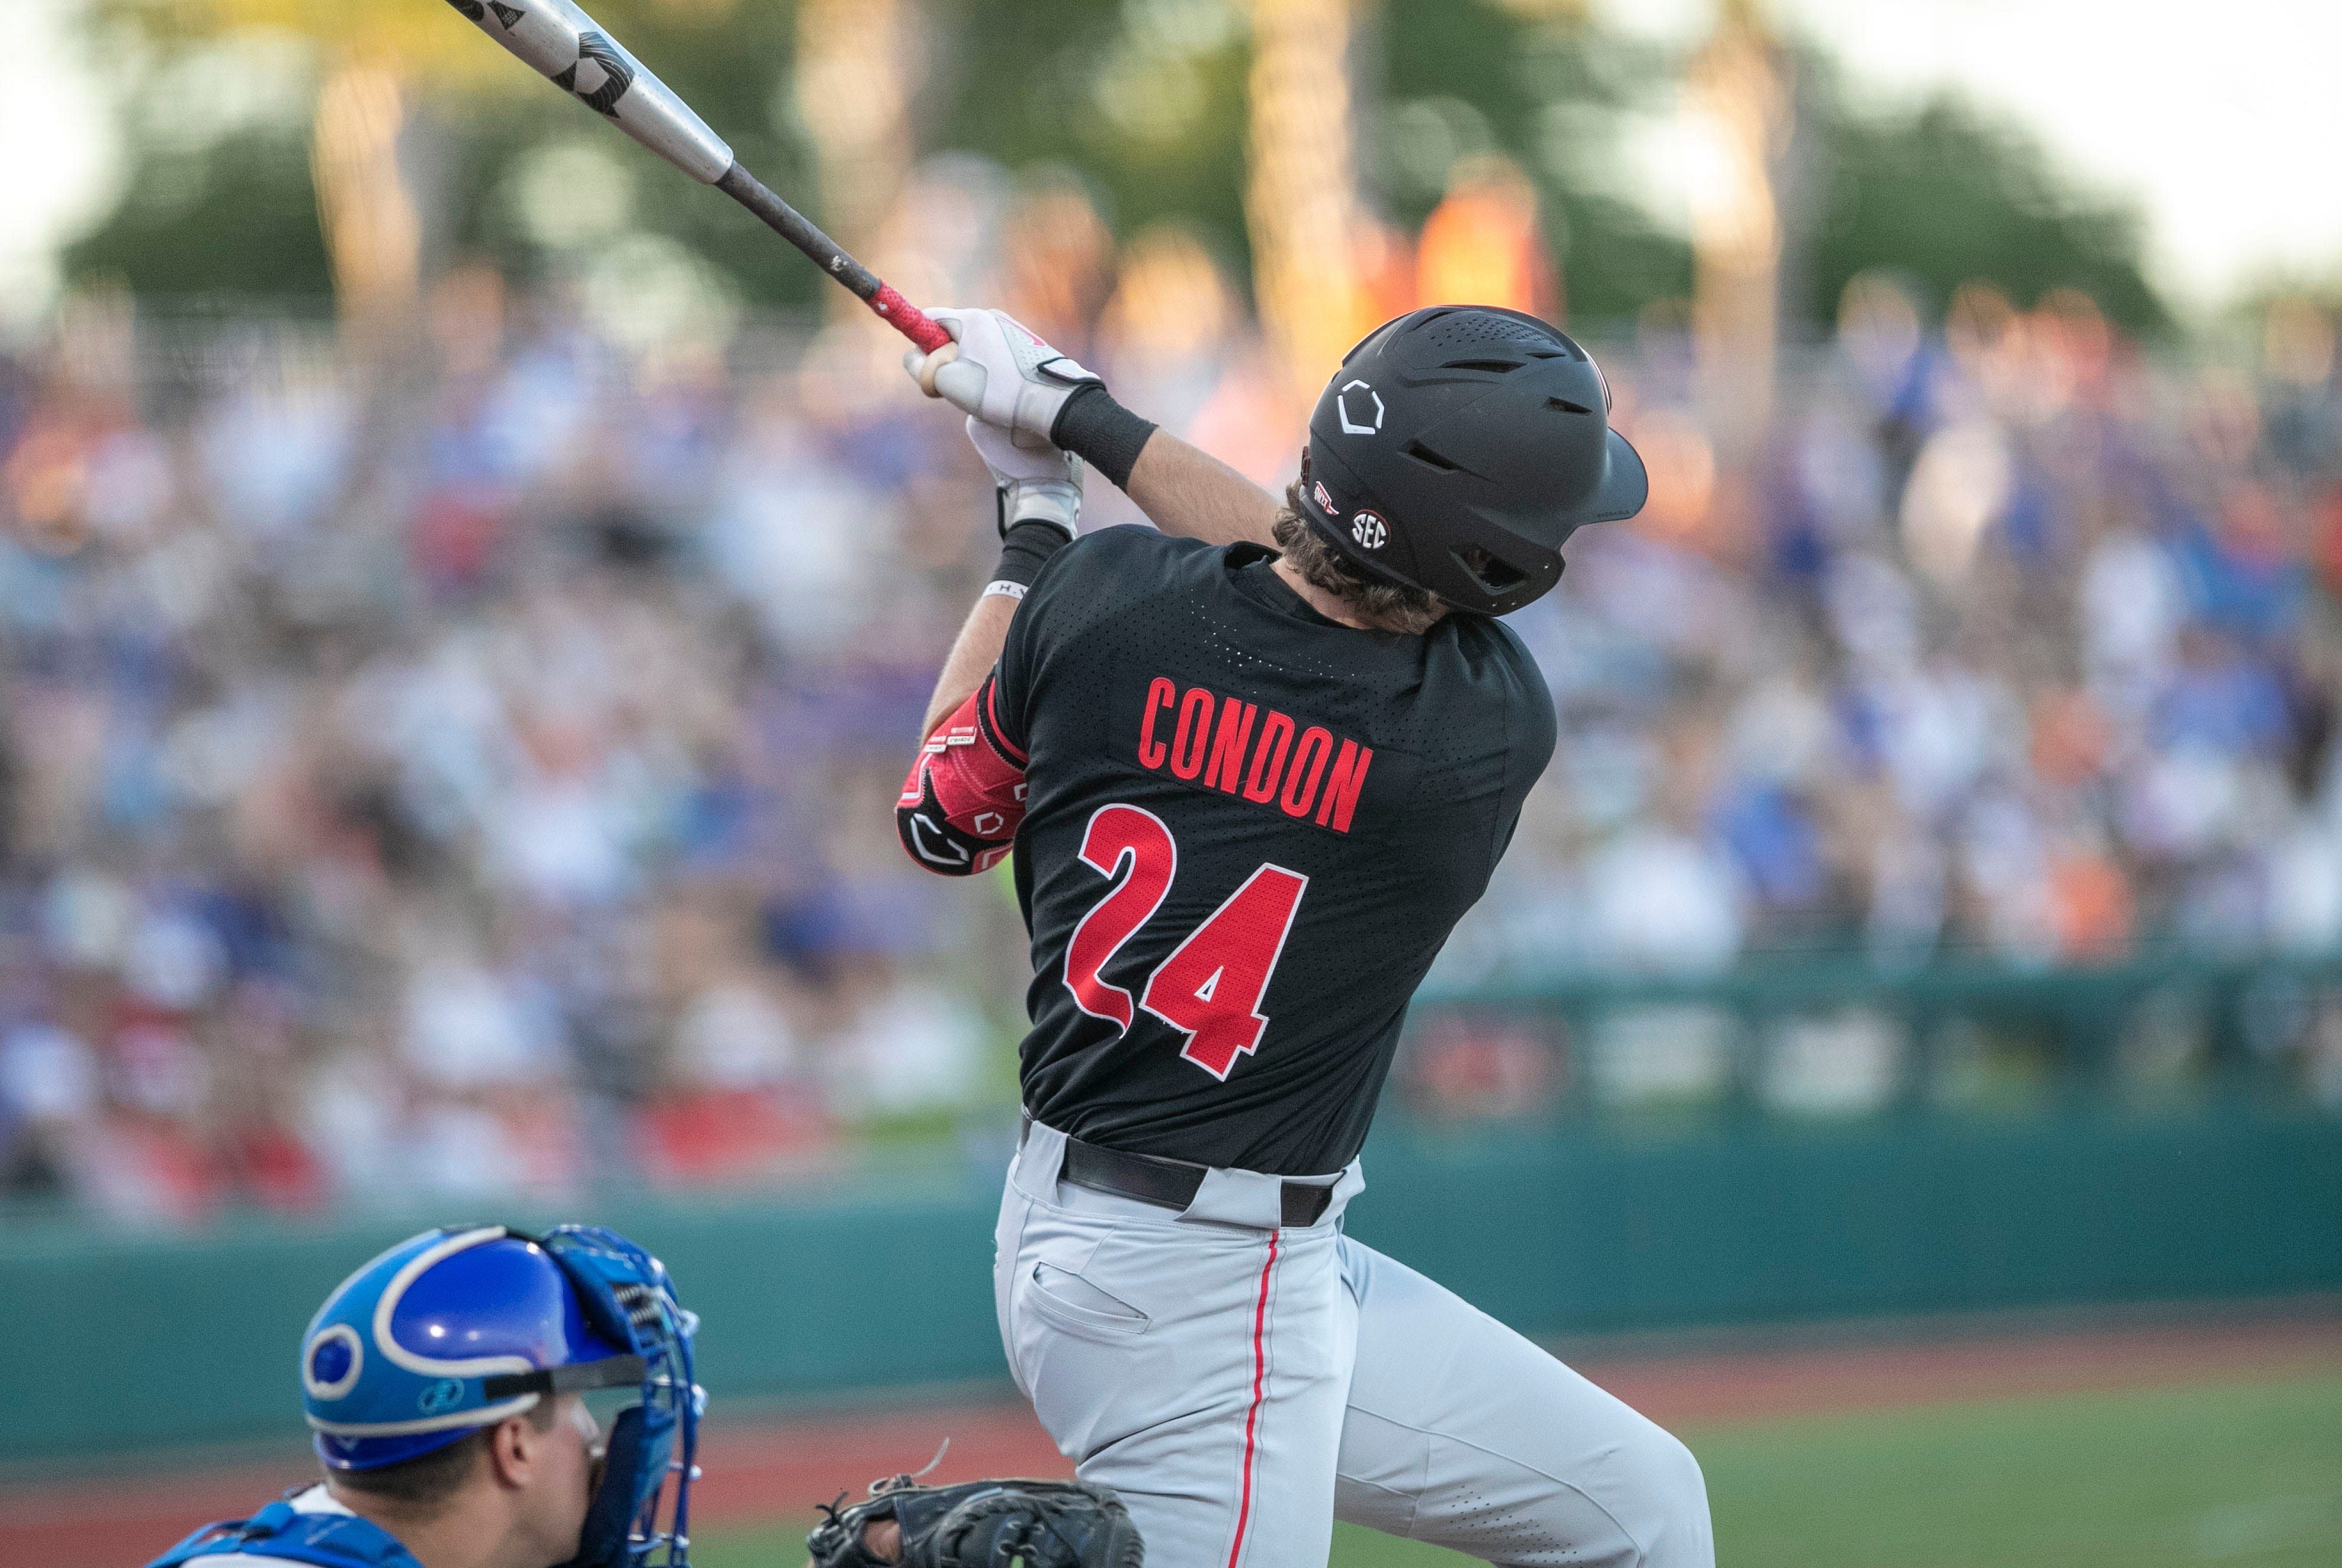 Georgia&#039;s Charlie Condon will be a highly sought-after MLB Draft pick.